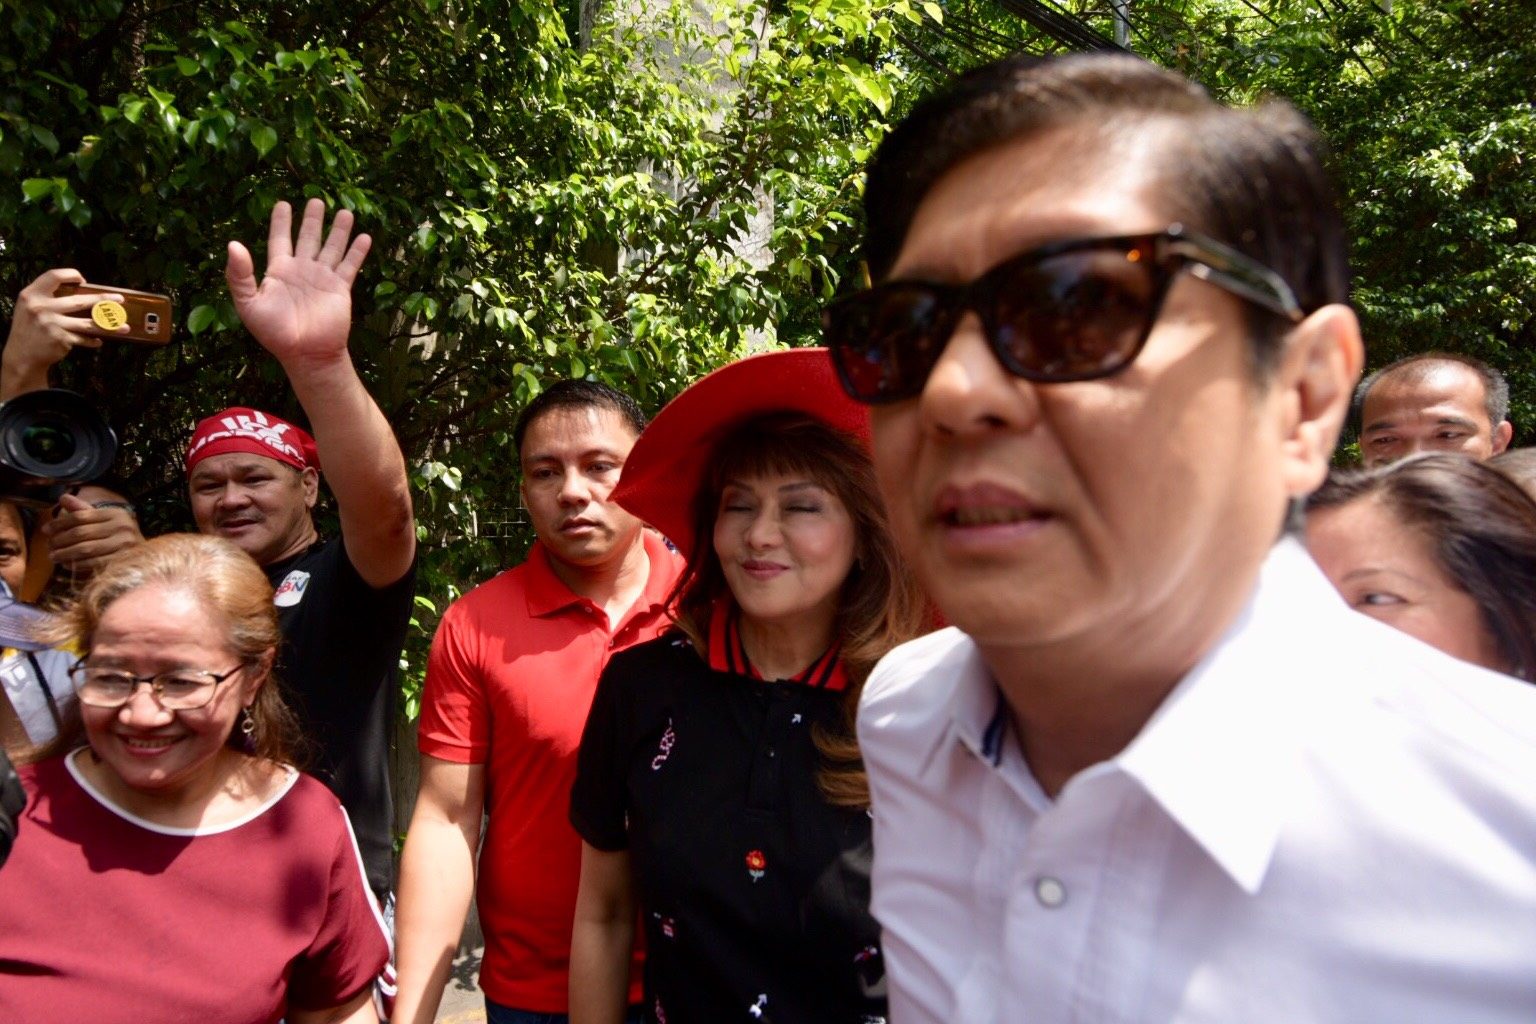 Imee mum on 2019: Bongbong Marcos protest most important